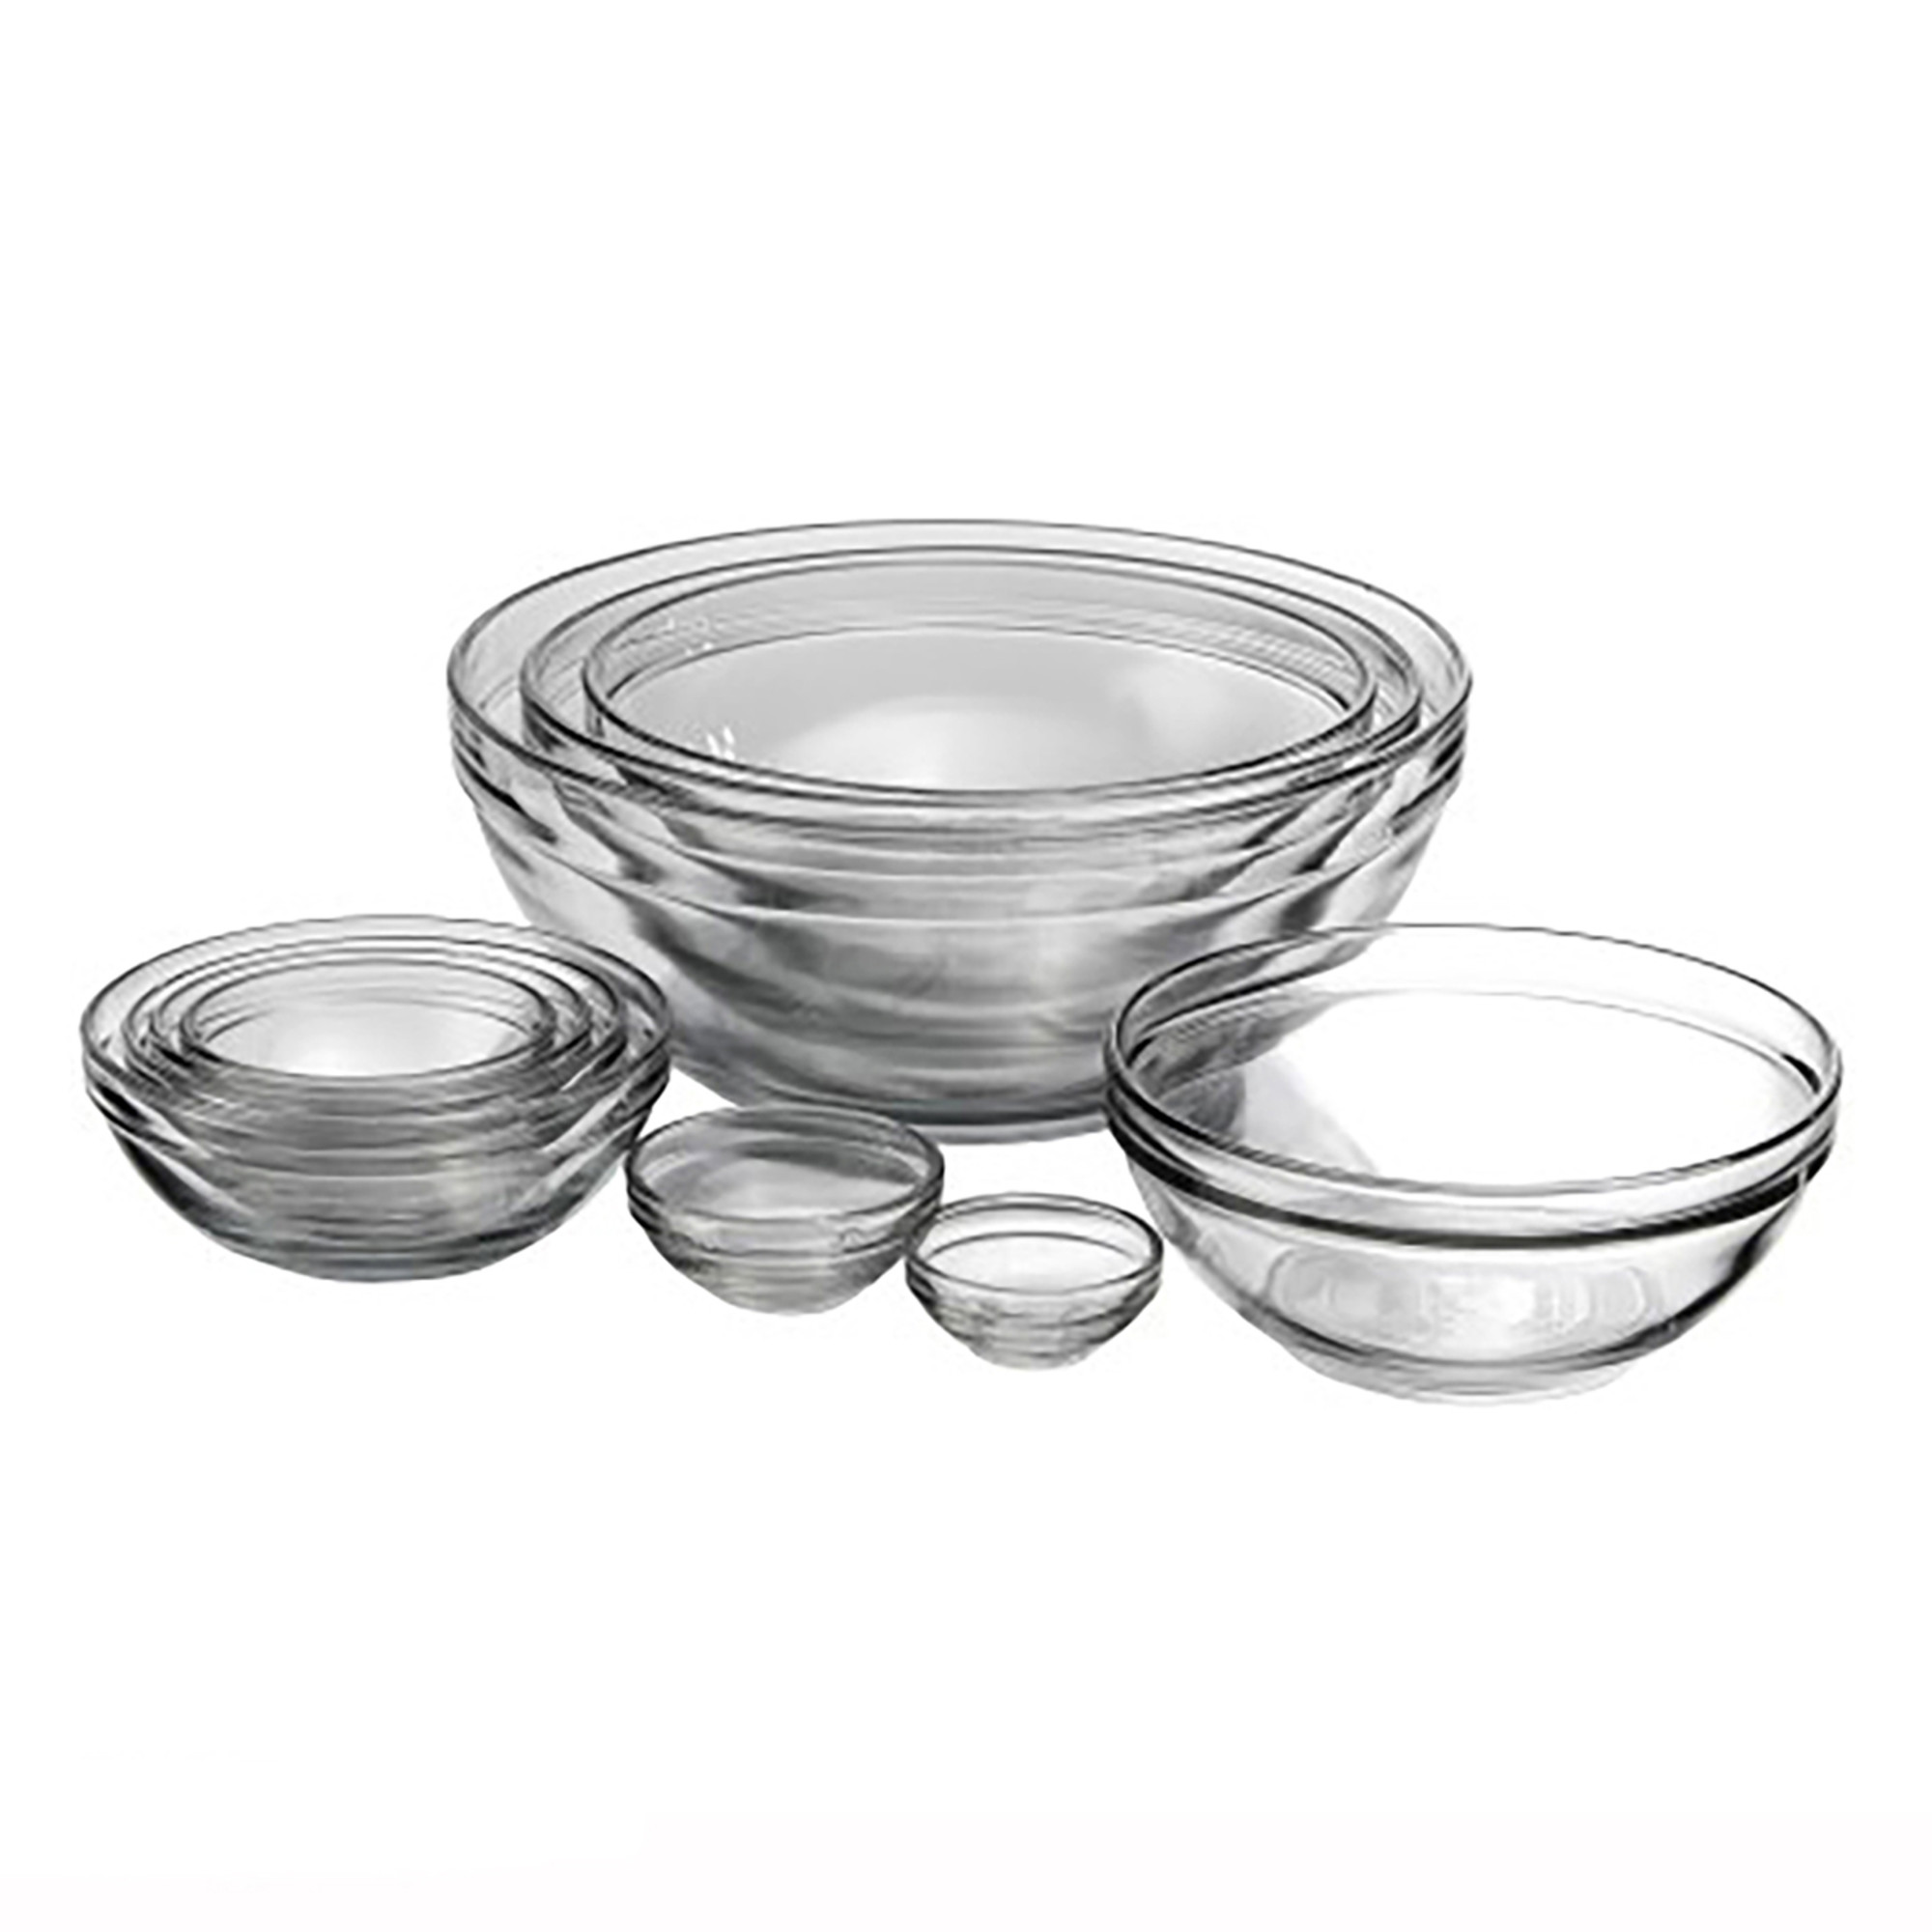 Mainstays Glass Mixing Bowls, 10 Piece Set - image 1 of 8